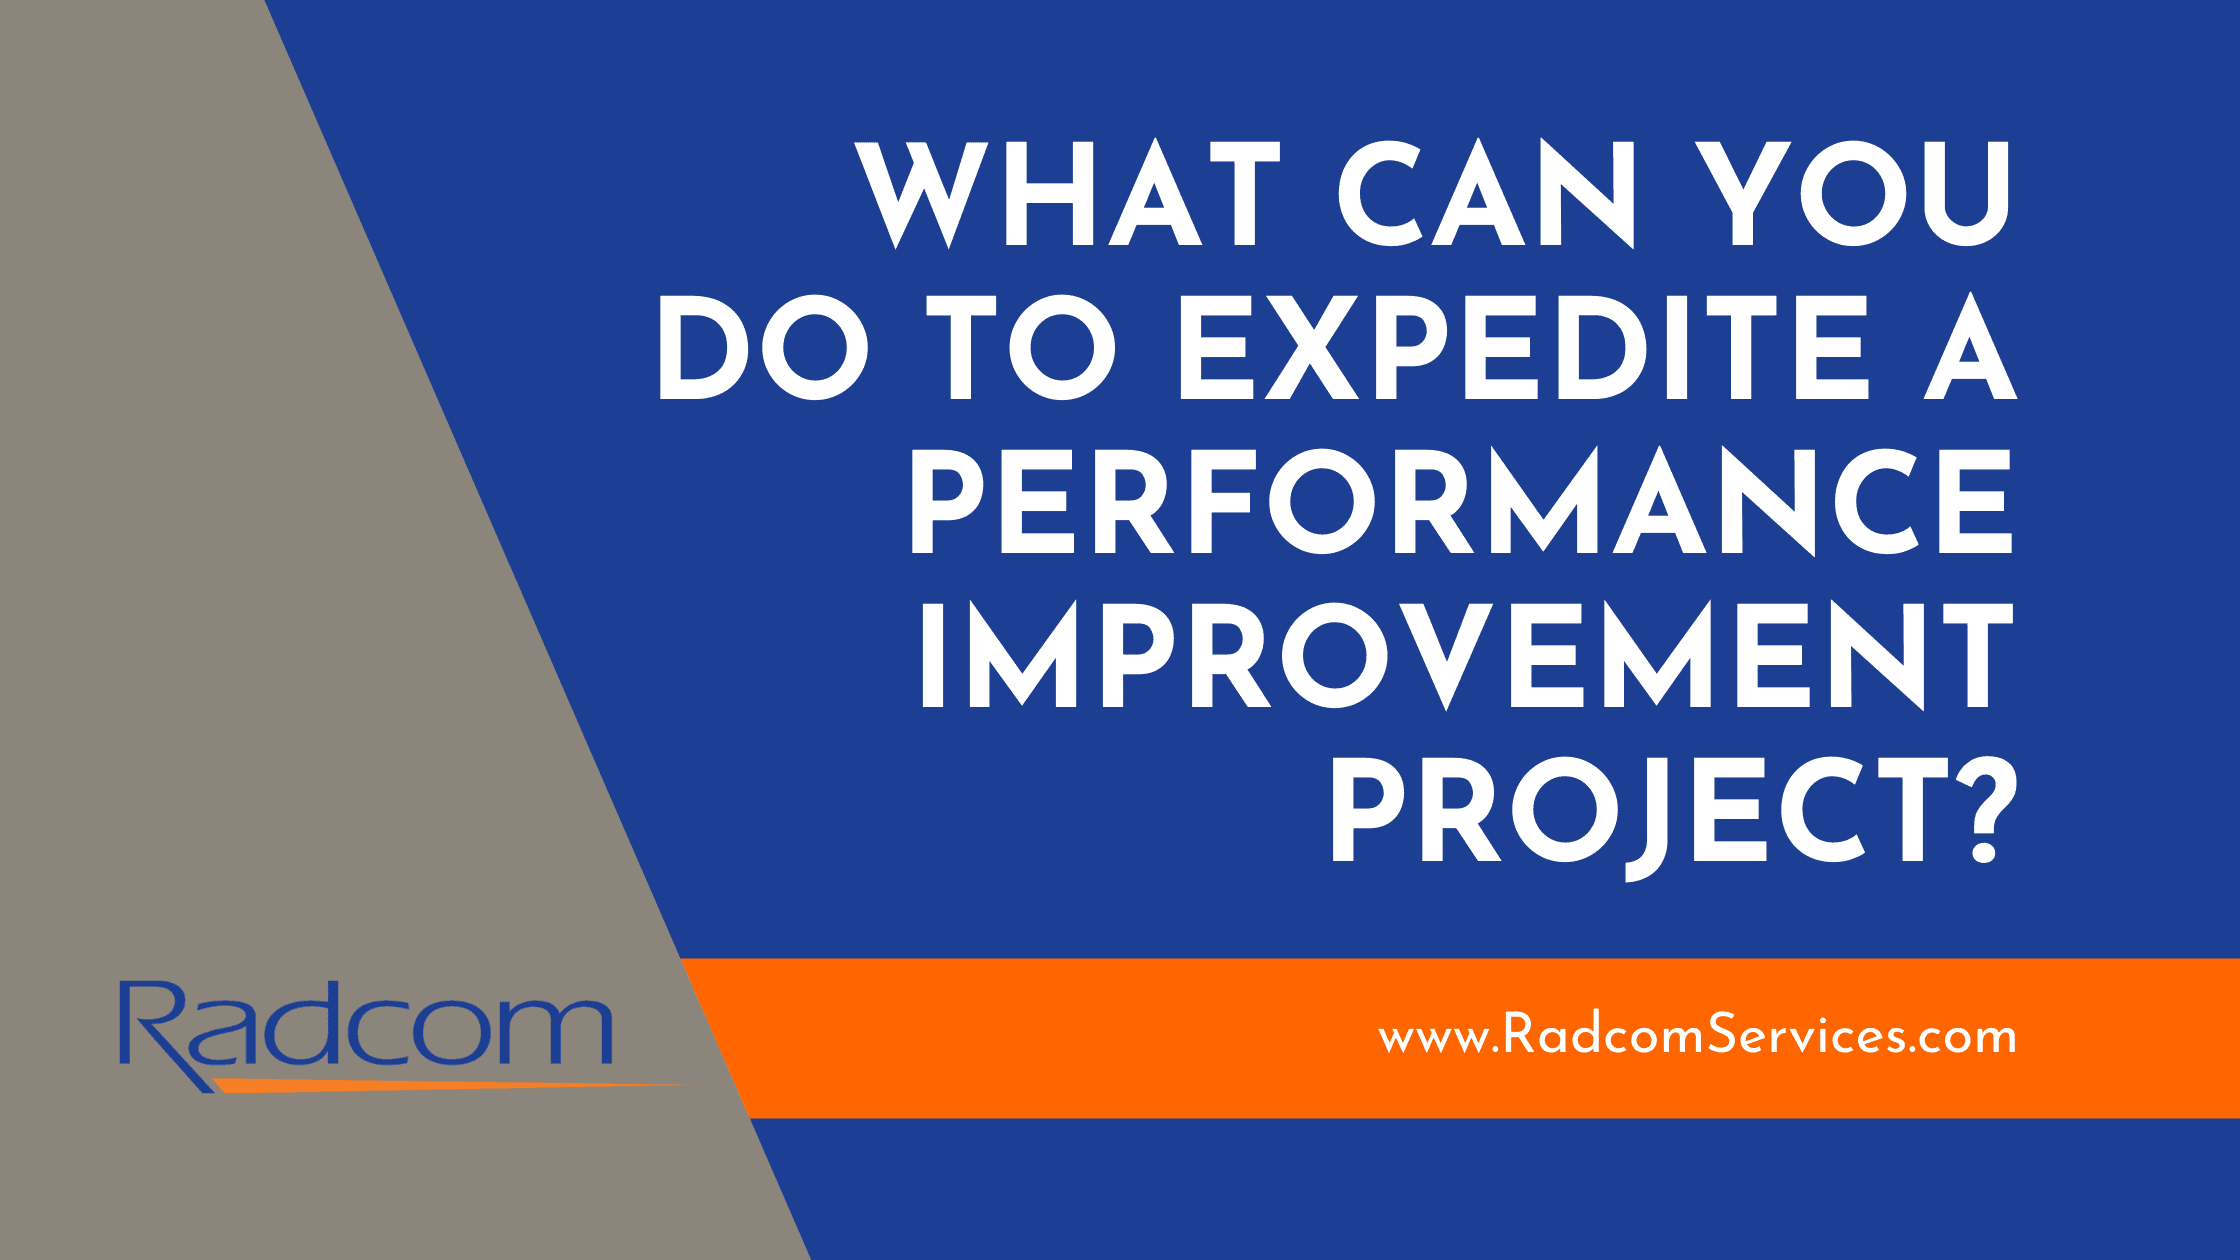 What Can You Do to Expedite a Performance Improvement Project